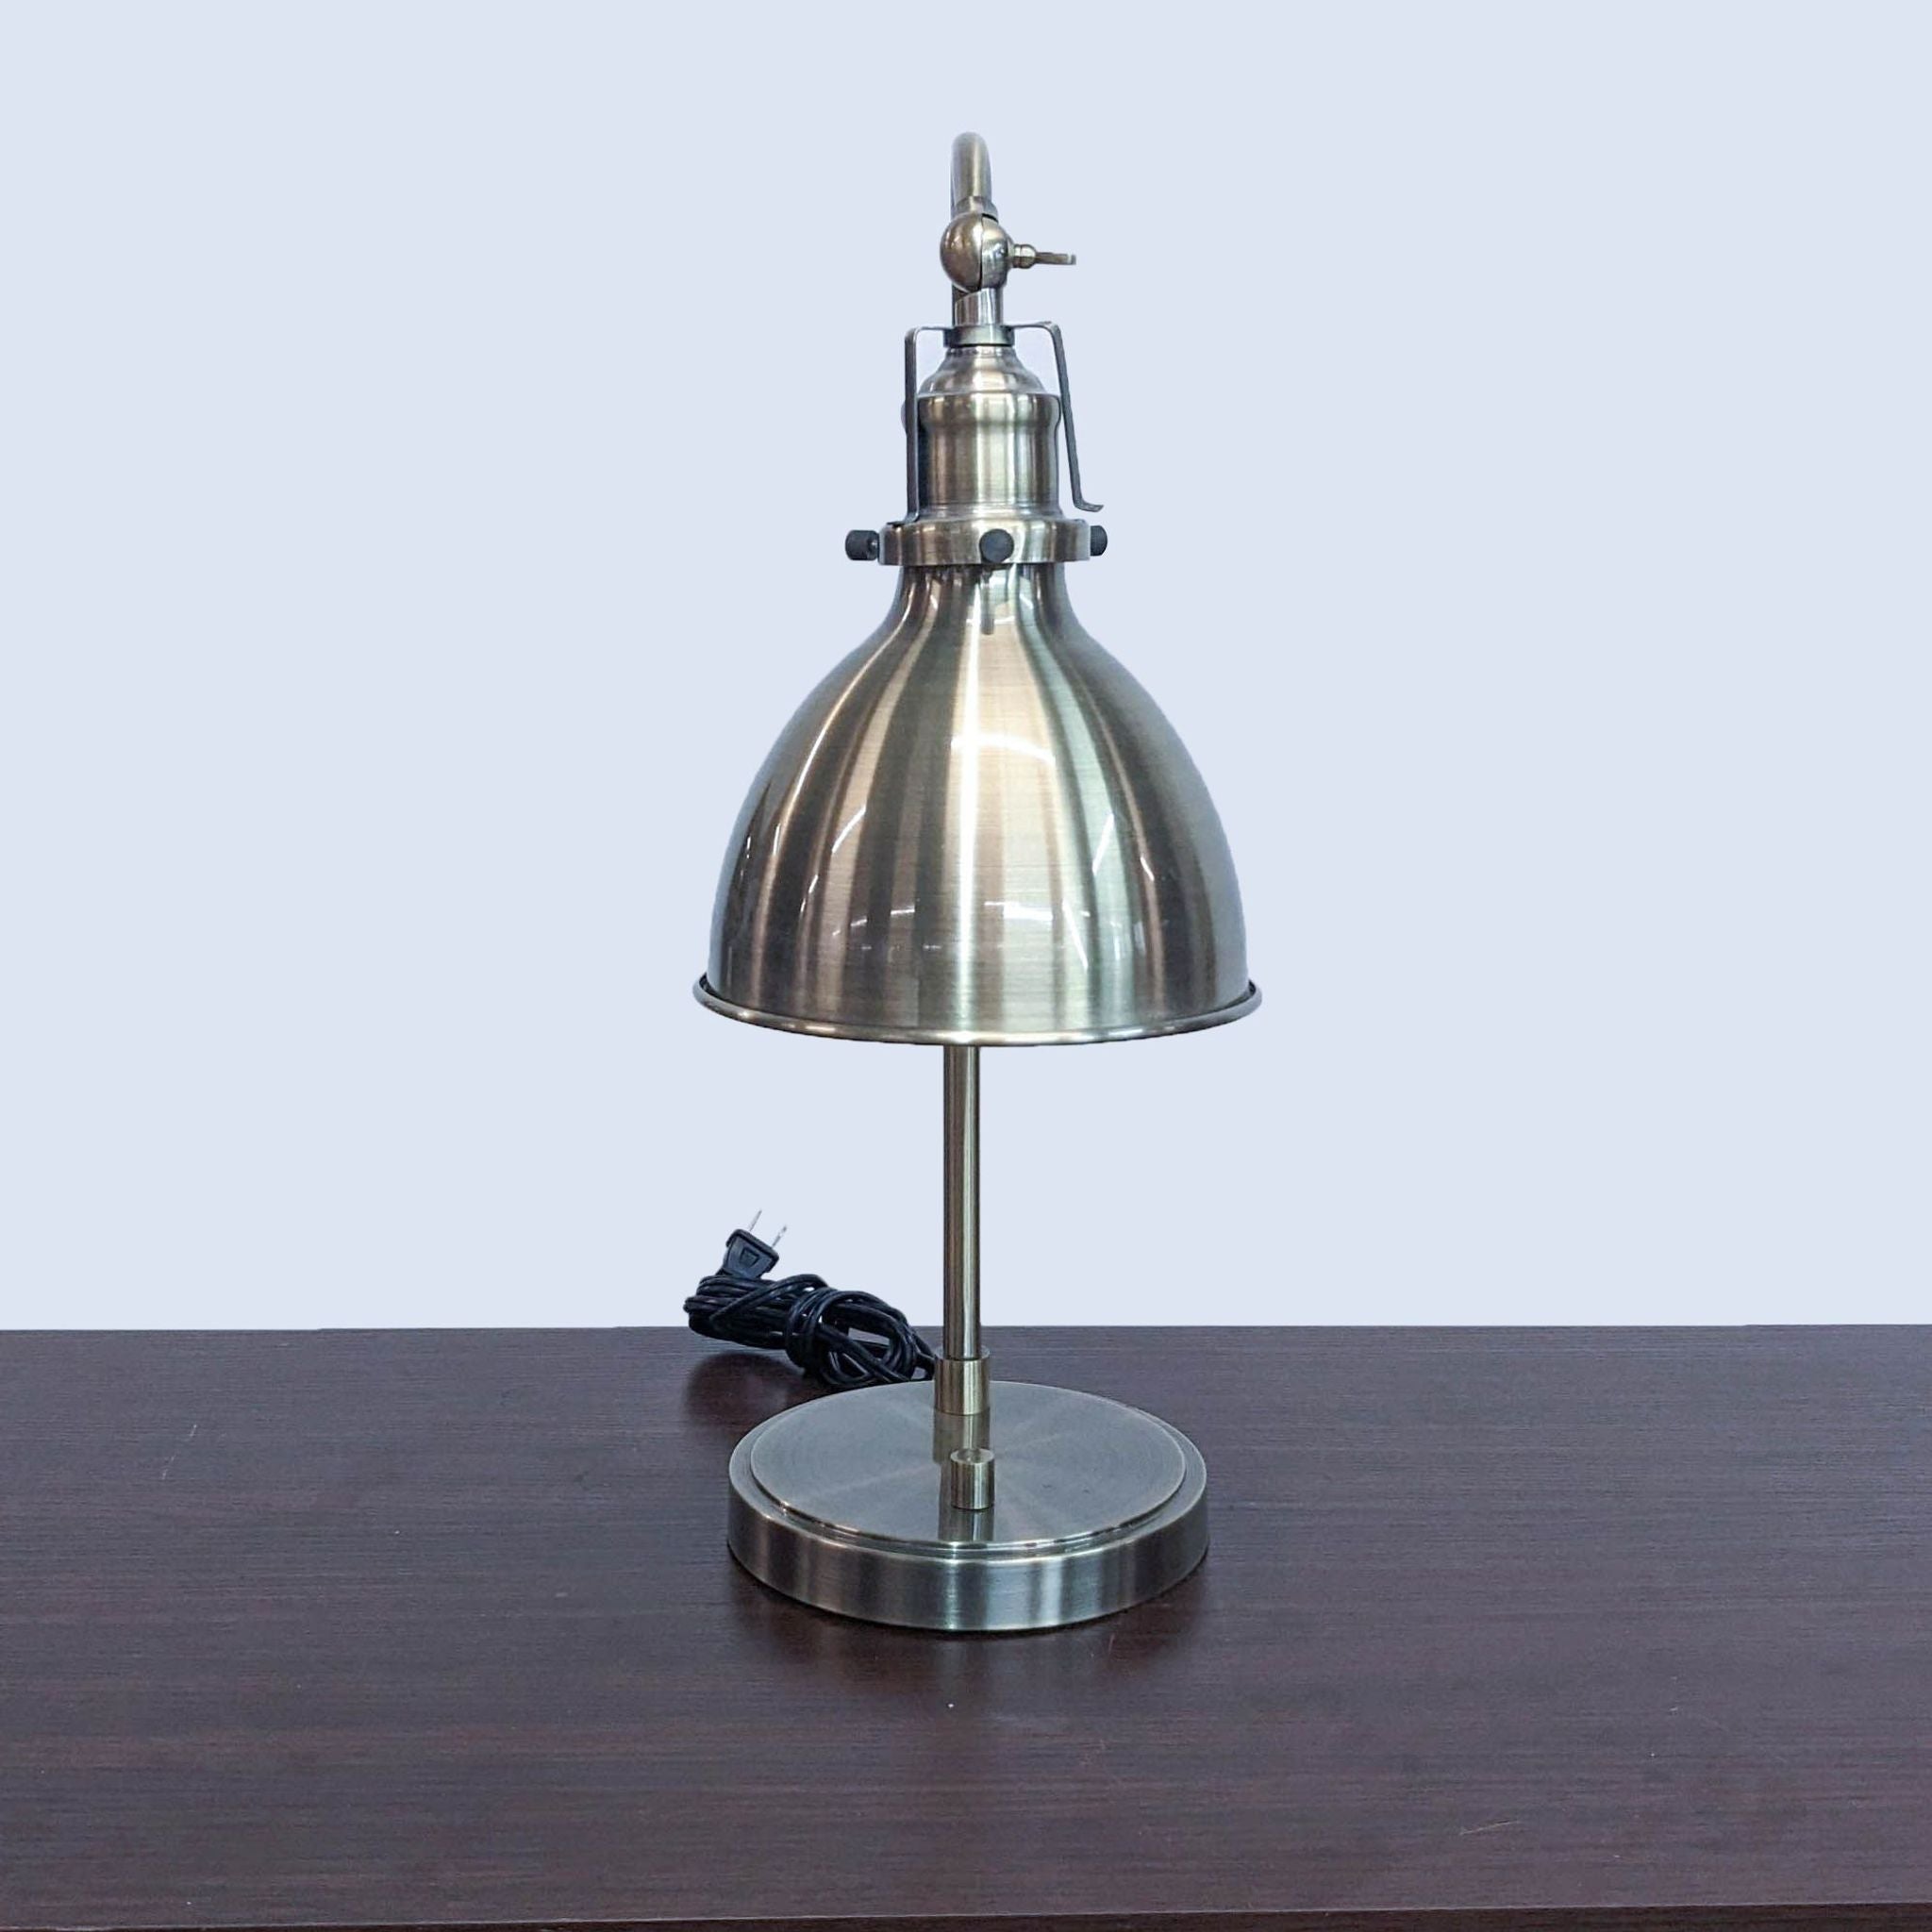 Brushed metal Intertek desk lamp with a vintage design, bell-shaped shade, and power cord, placed on wood surface.